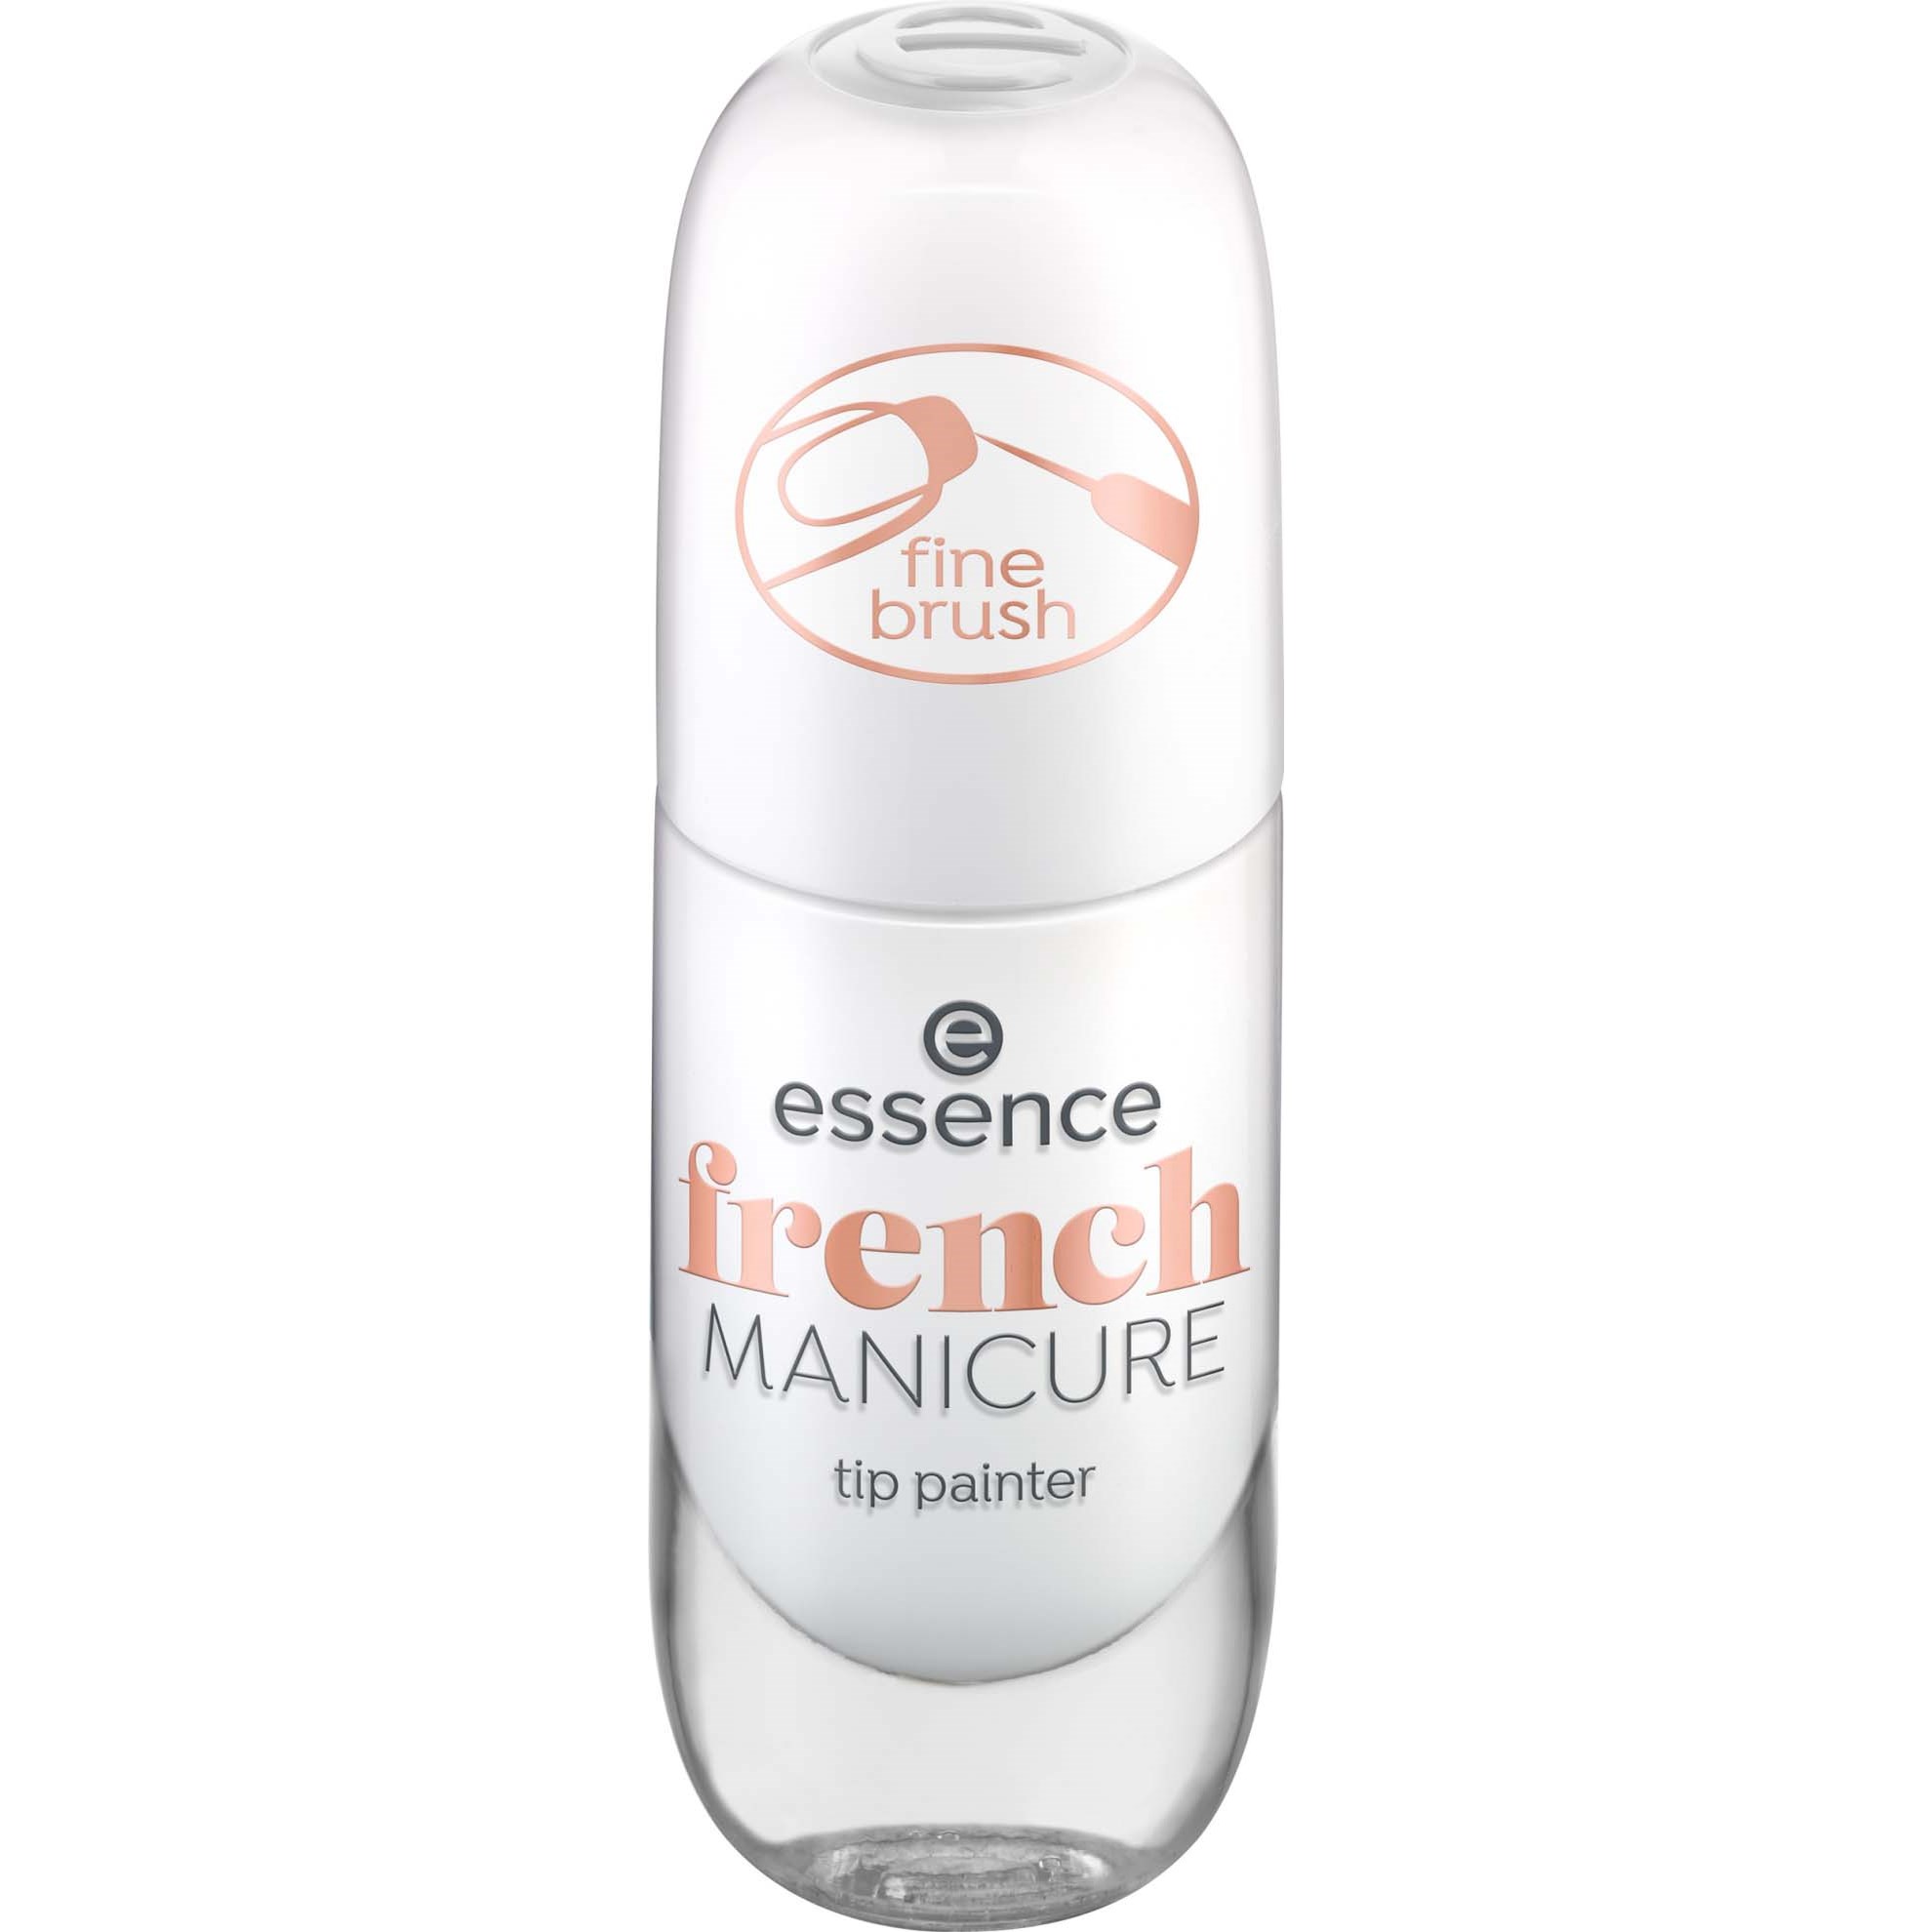 Läs mer om essence French Manicure Tip Painter 01 Youre so fine